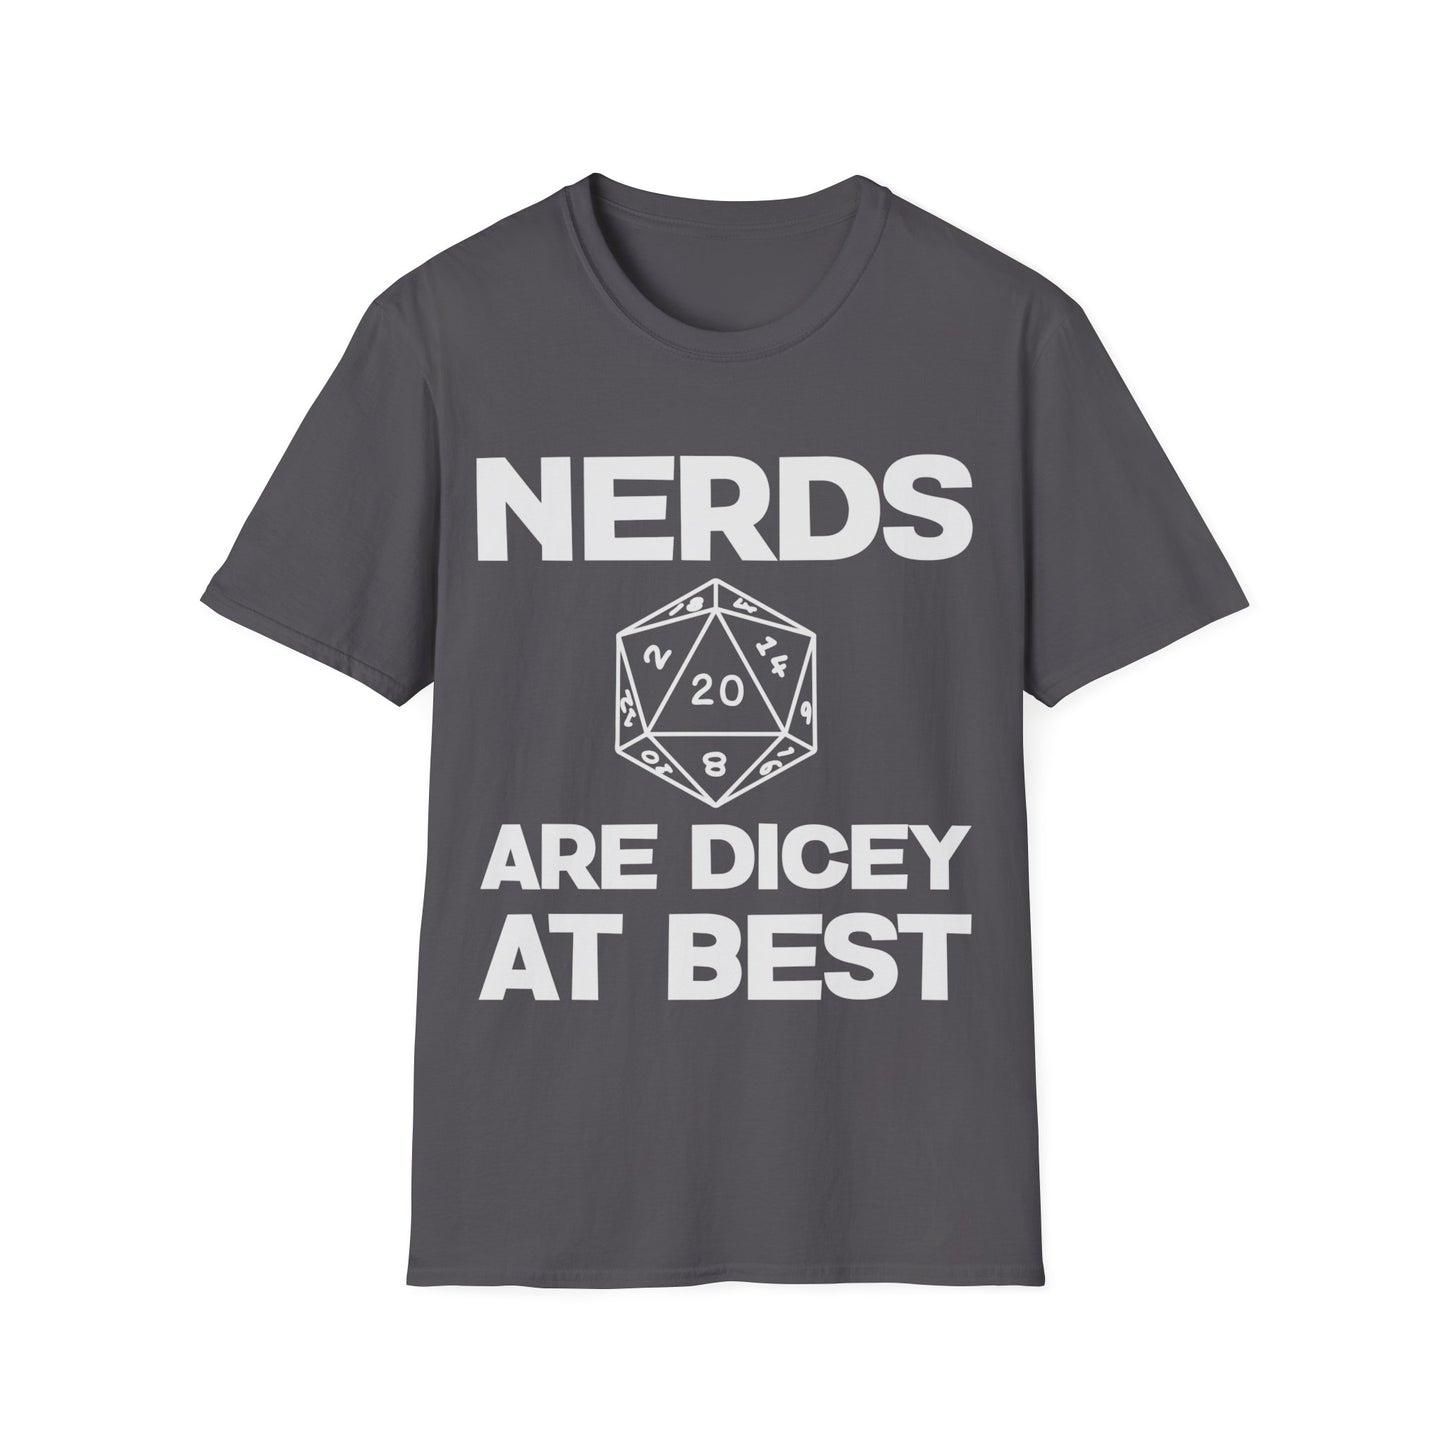 Nerds Are Dicey At Best T-Shirt